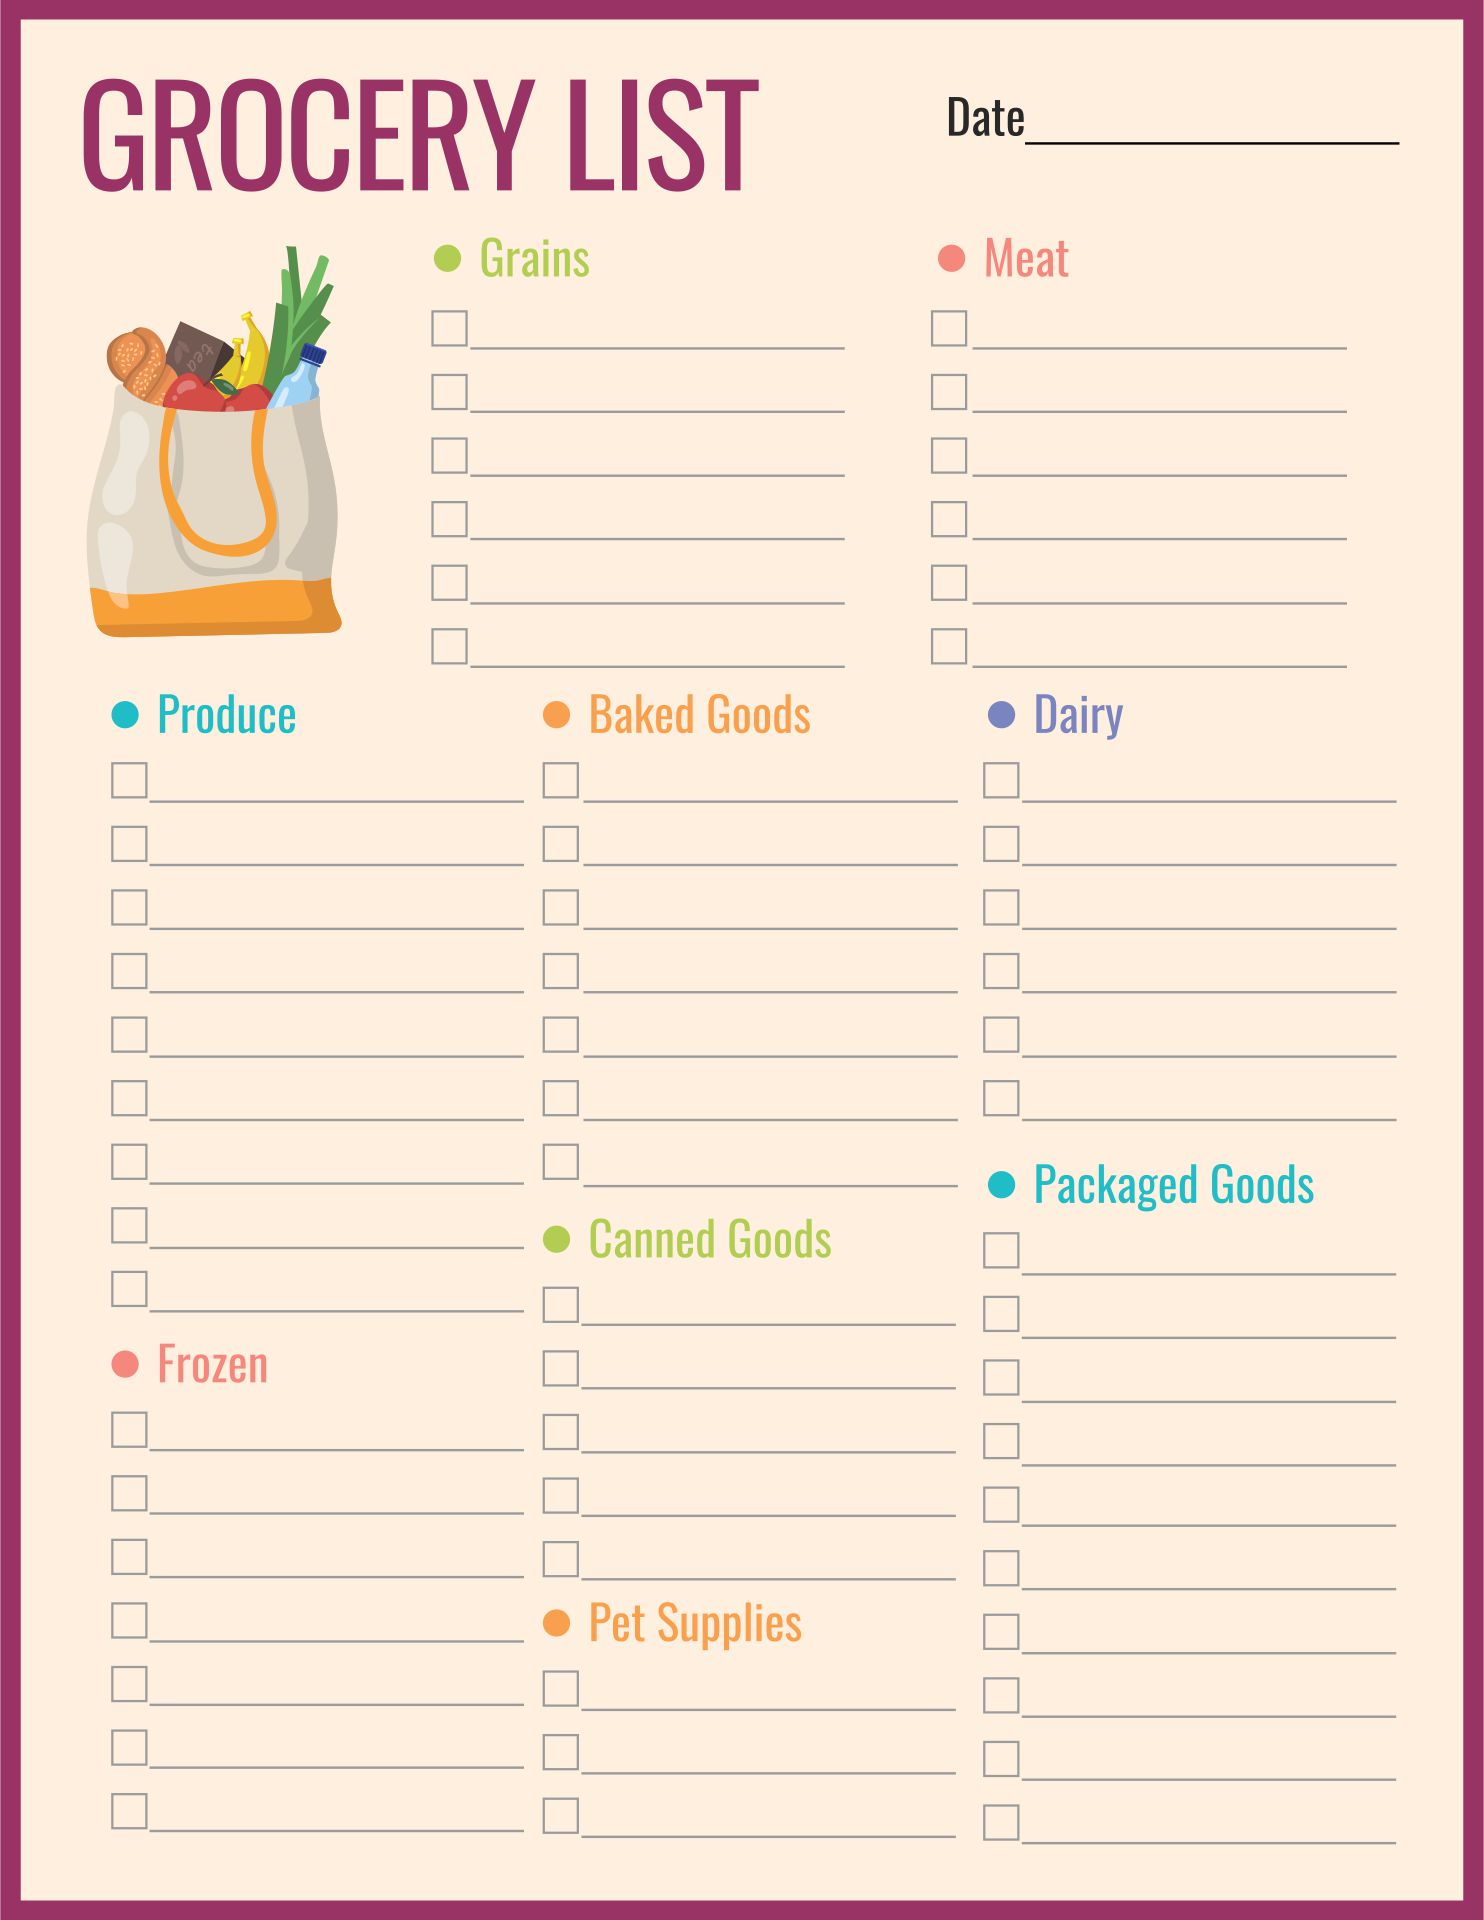 7 Best Images of Editable Blank Printable Checklists - Free Printable ...